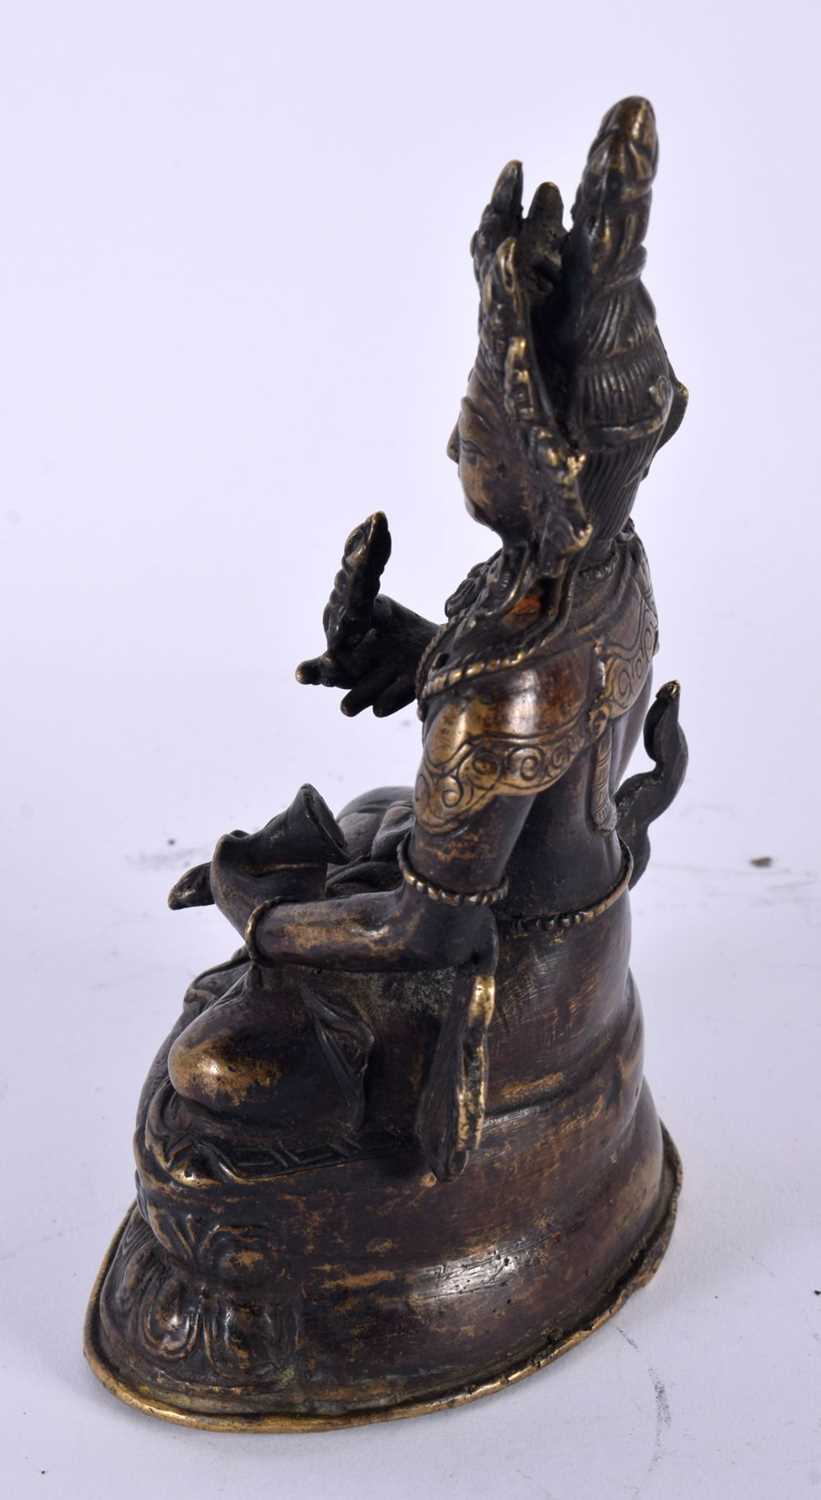 A 19TH CENTURY TIBETAN NEPALESE BRONZE FIGURE OF A SEATED BUDDHA modelled upon a triangular lotus - Image 2 of 4